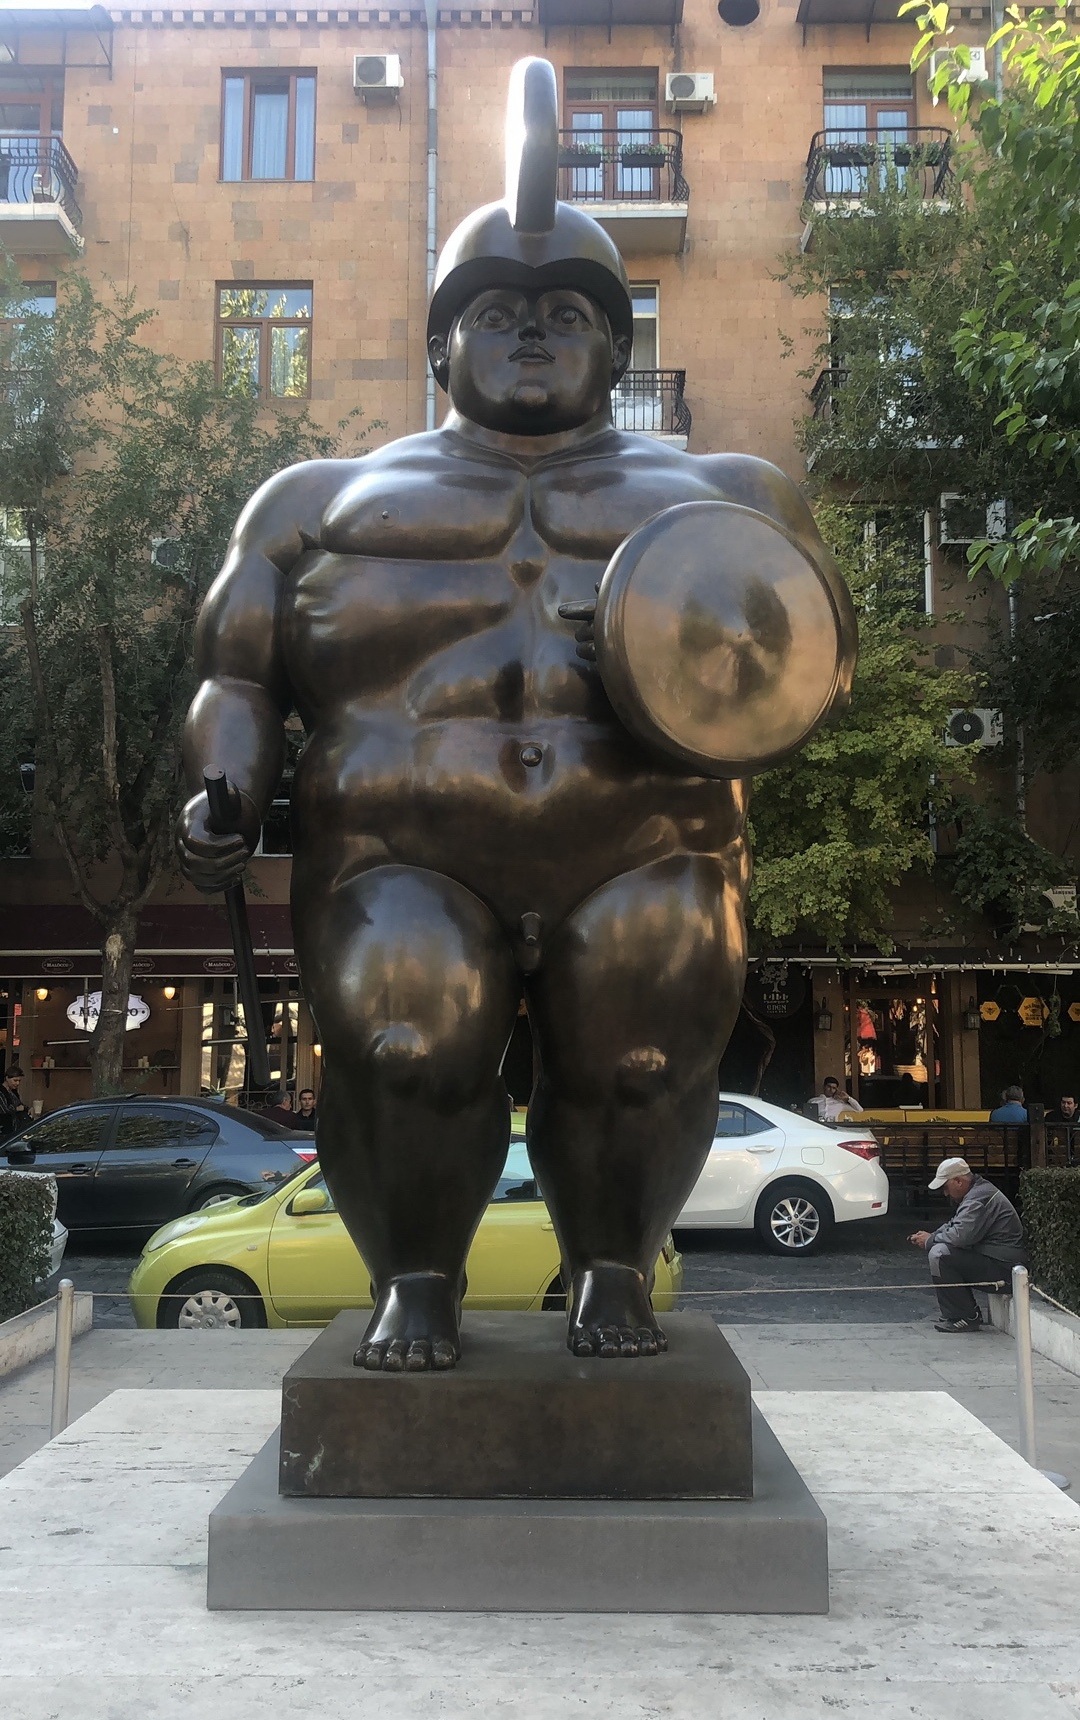 Inflated Animal and Human Shapes in the Art of Fernando Botero